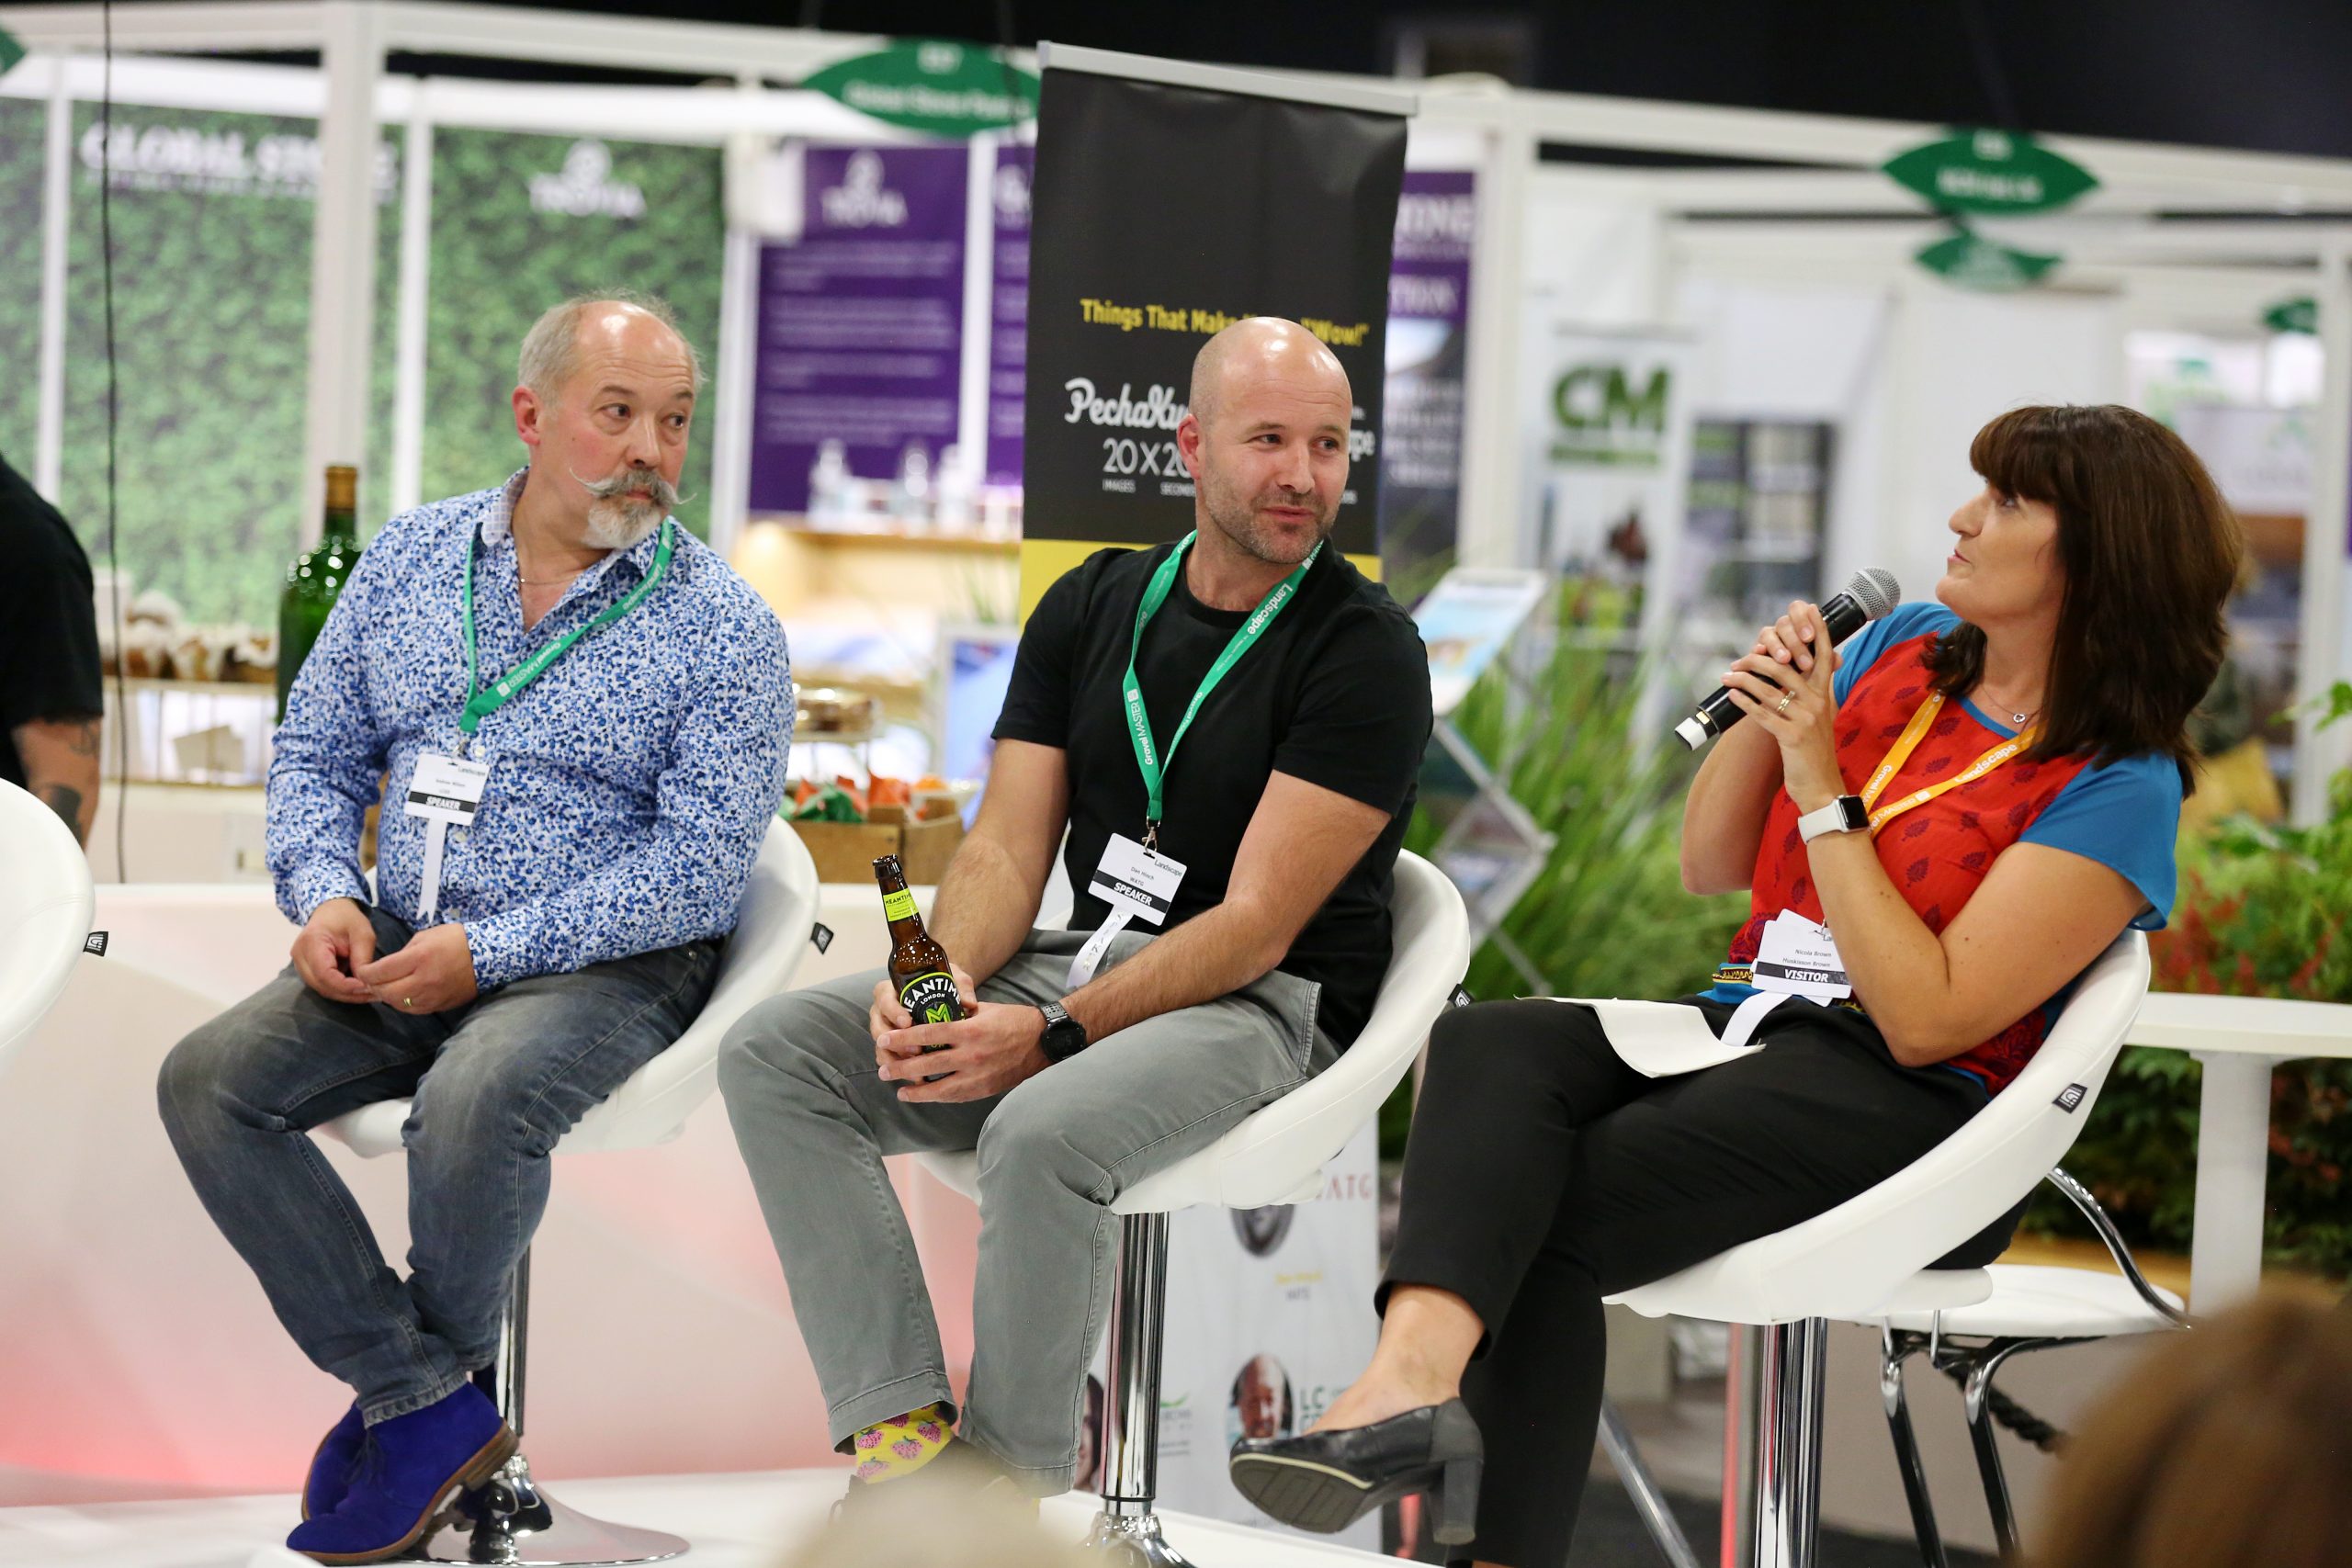 The Countdown to LANDSCAPE 2021 is on. The UK’s premier landscaping exhibition is less than a month away – have you registered yet? #LANDSCAPE2021 @LandscapeEvent